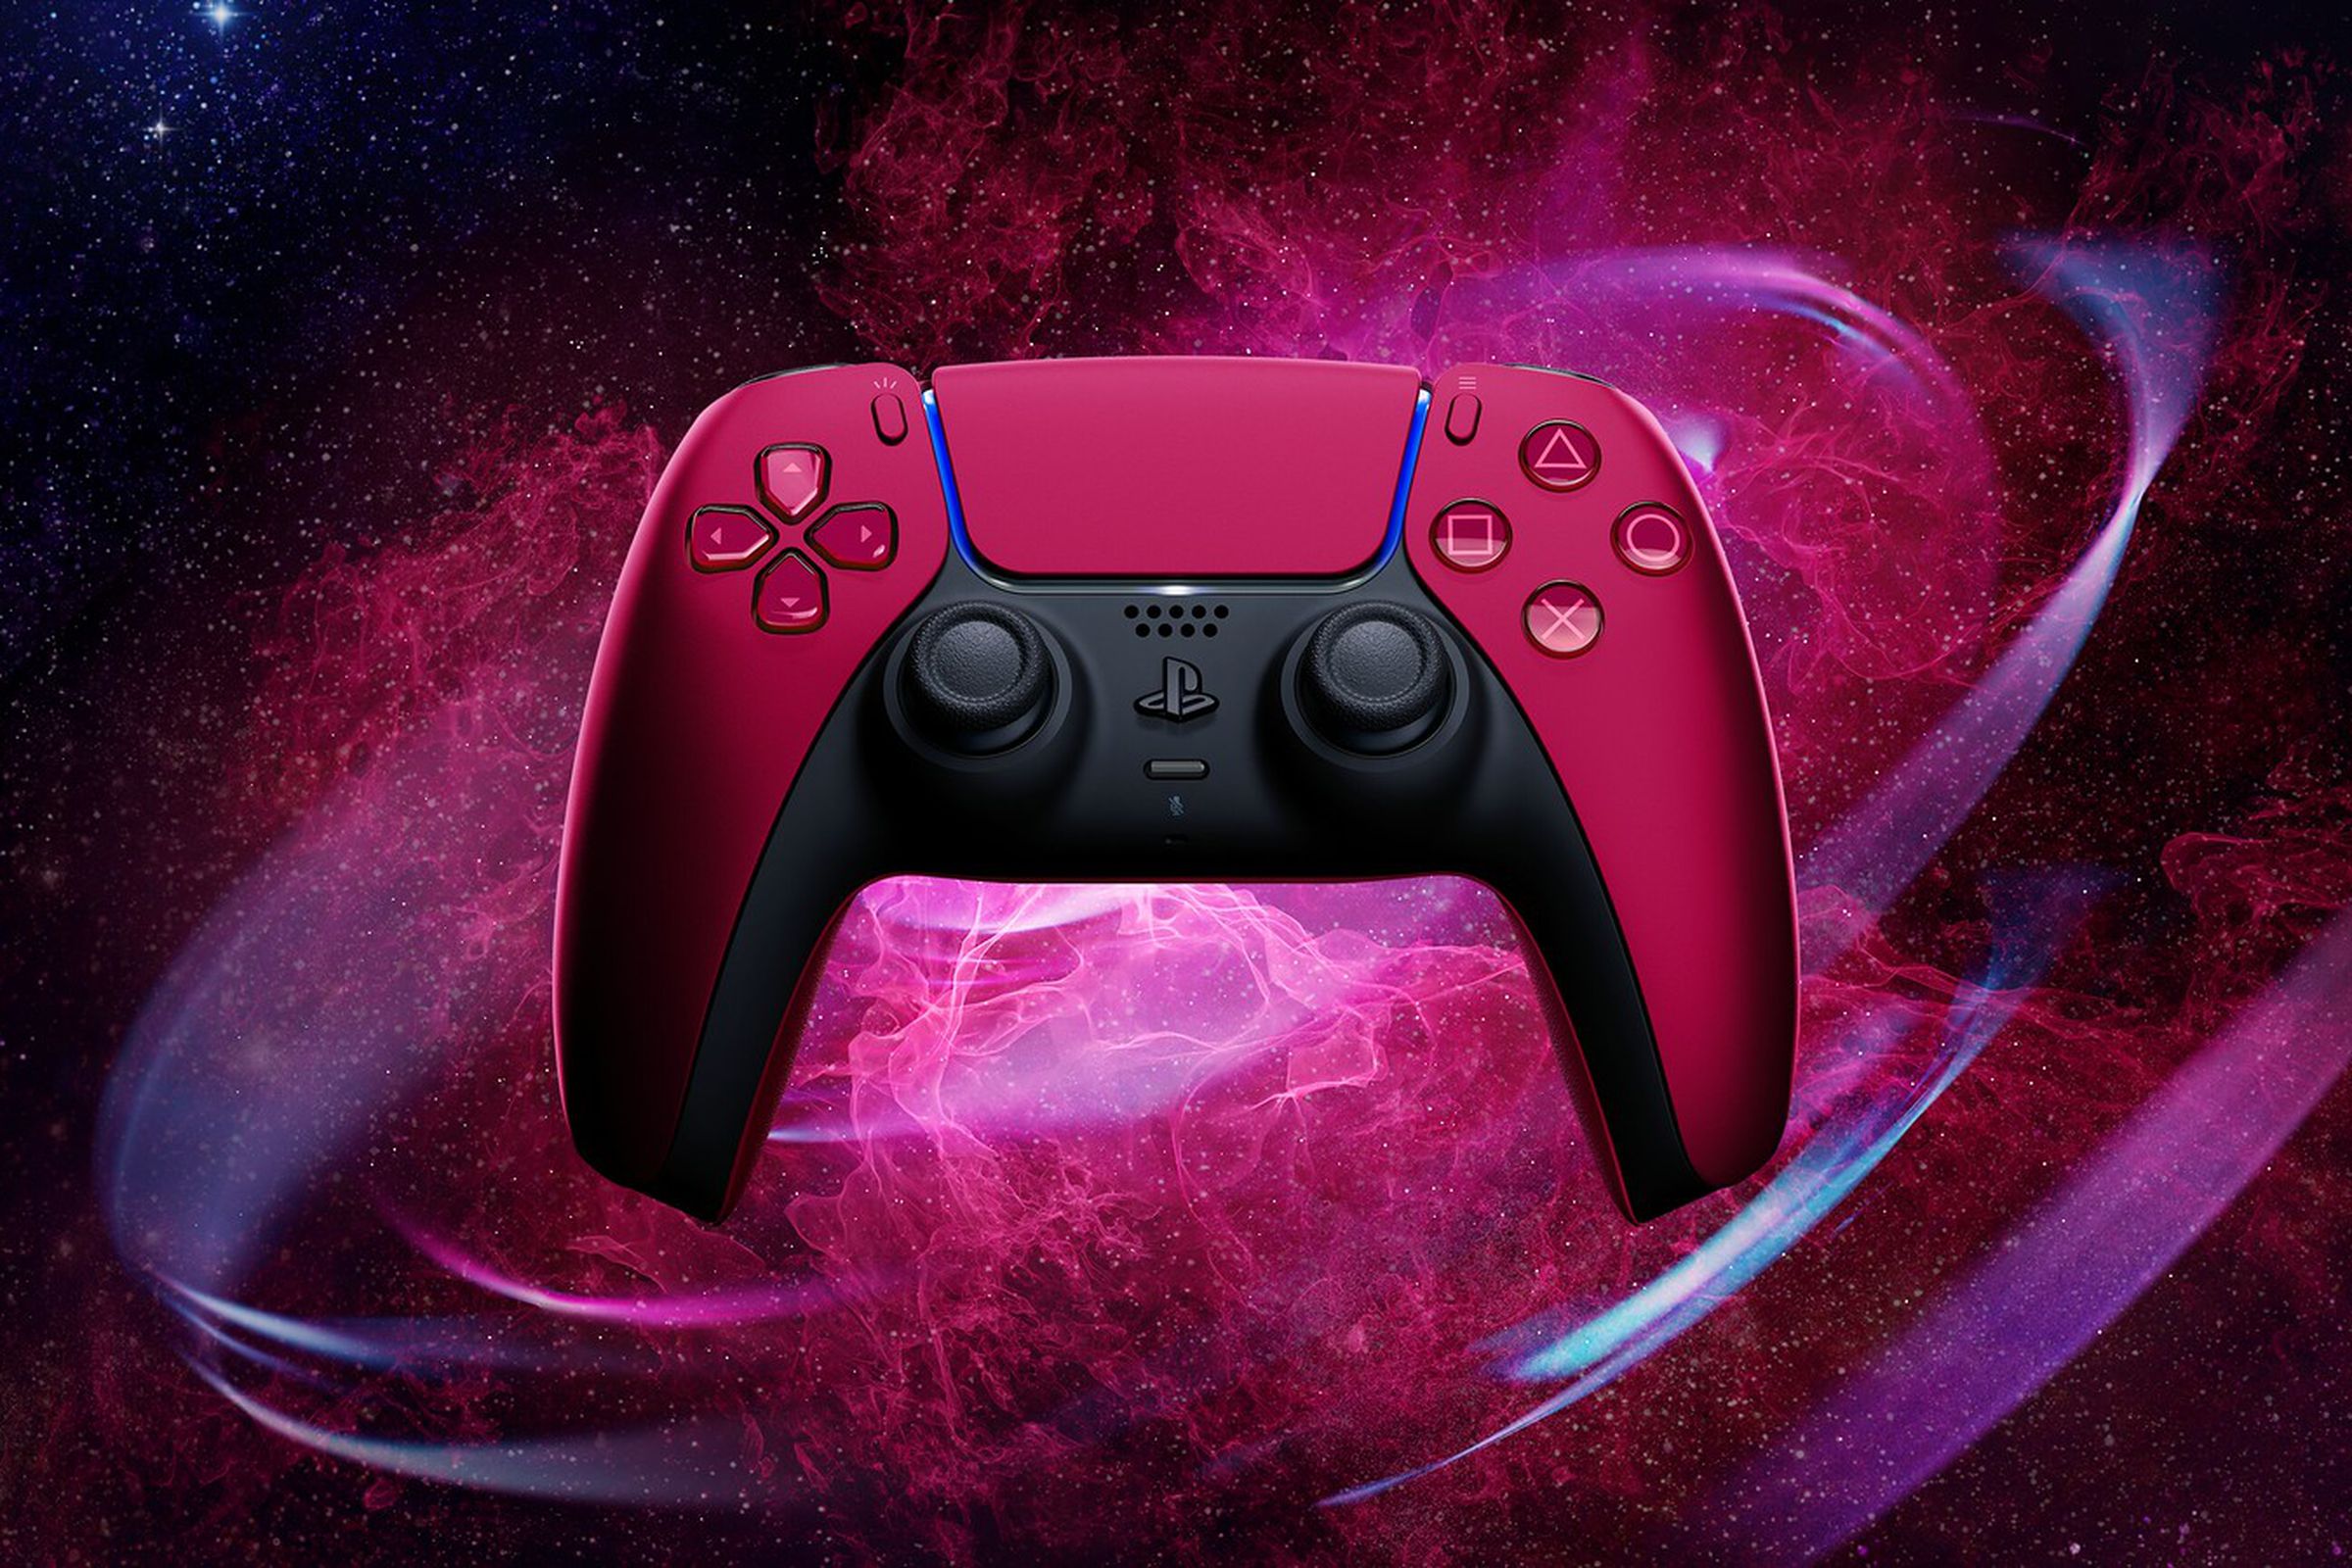 The new DualSense controller comes in two iterations: Midnight Black and Cosmic Red (pictured).